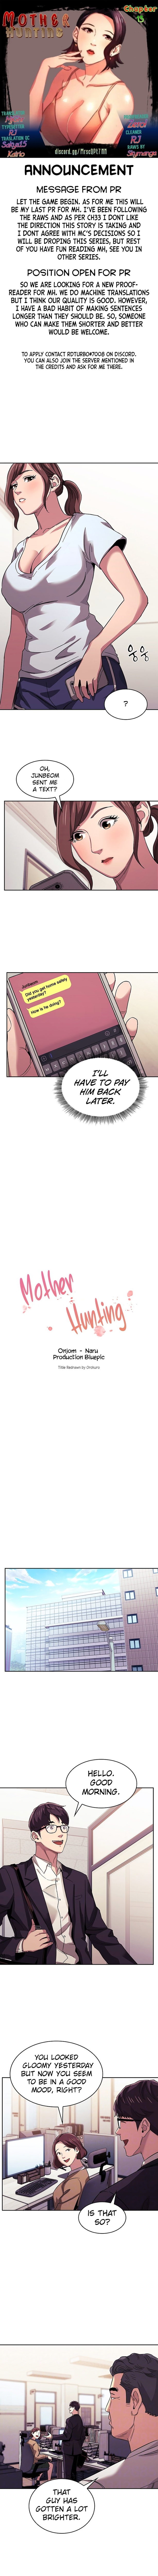 Mother Hunting image